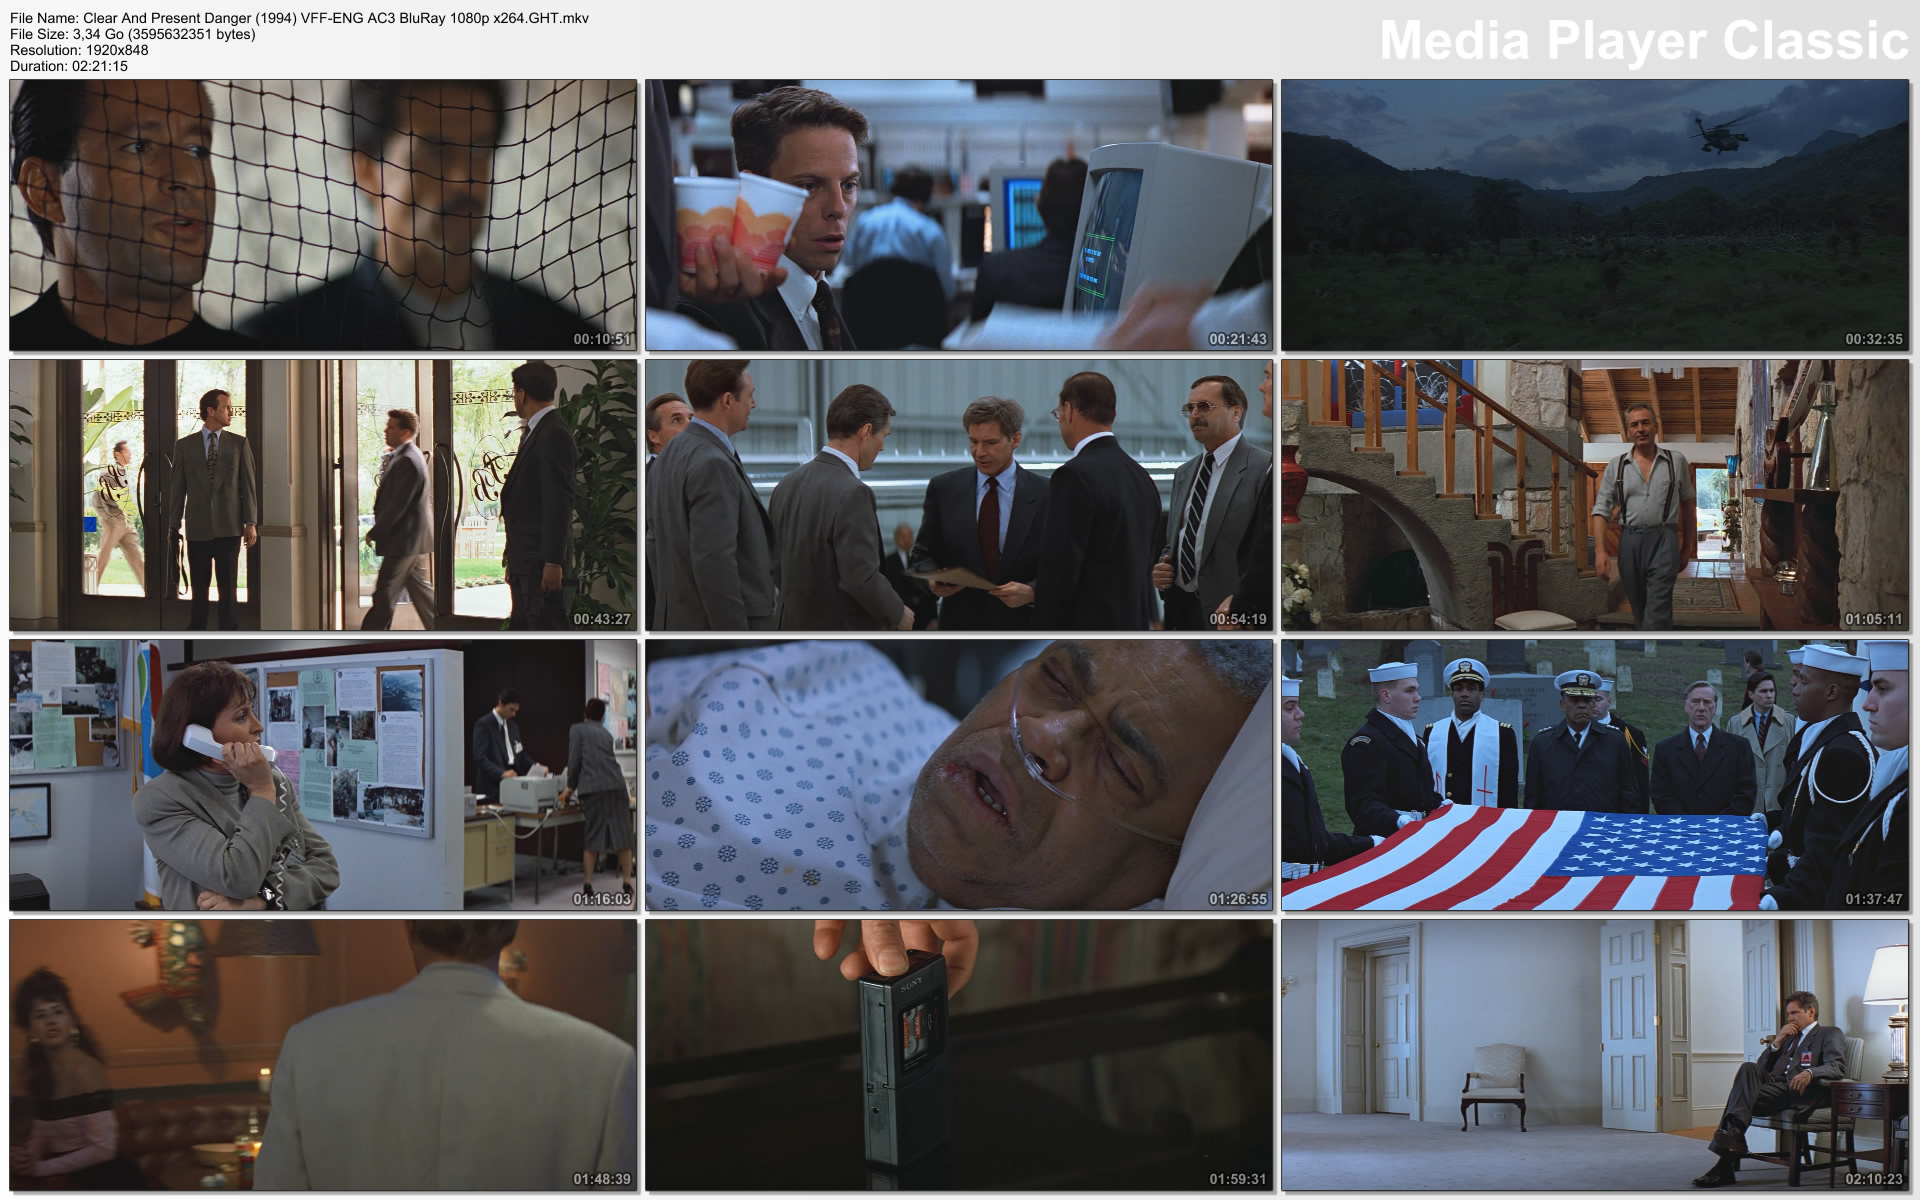 Clear And Present Danger (1994) VFF-ENG AC3 BluRay 1080p x264.GHT